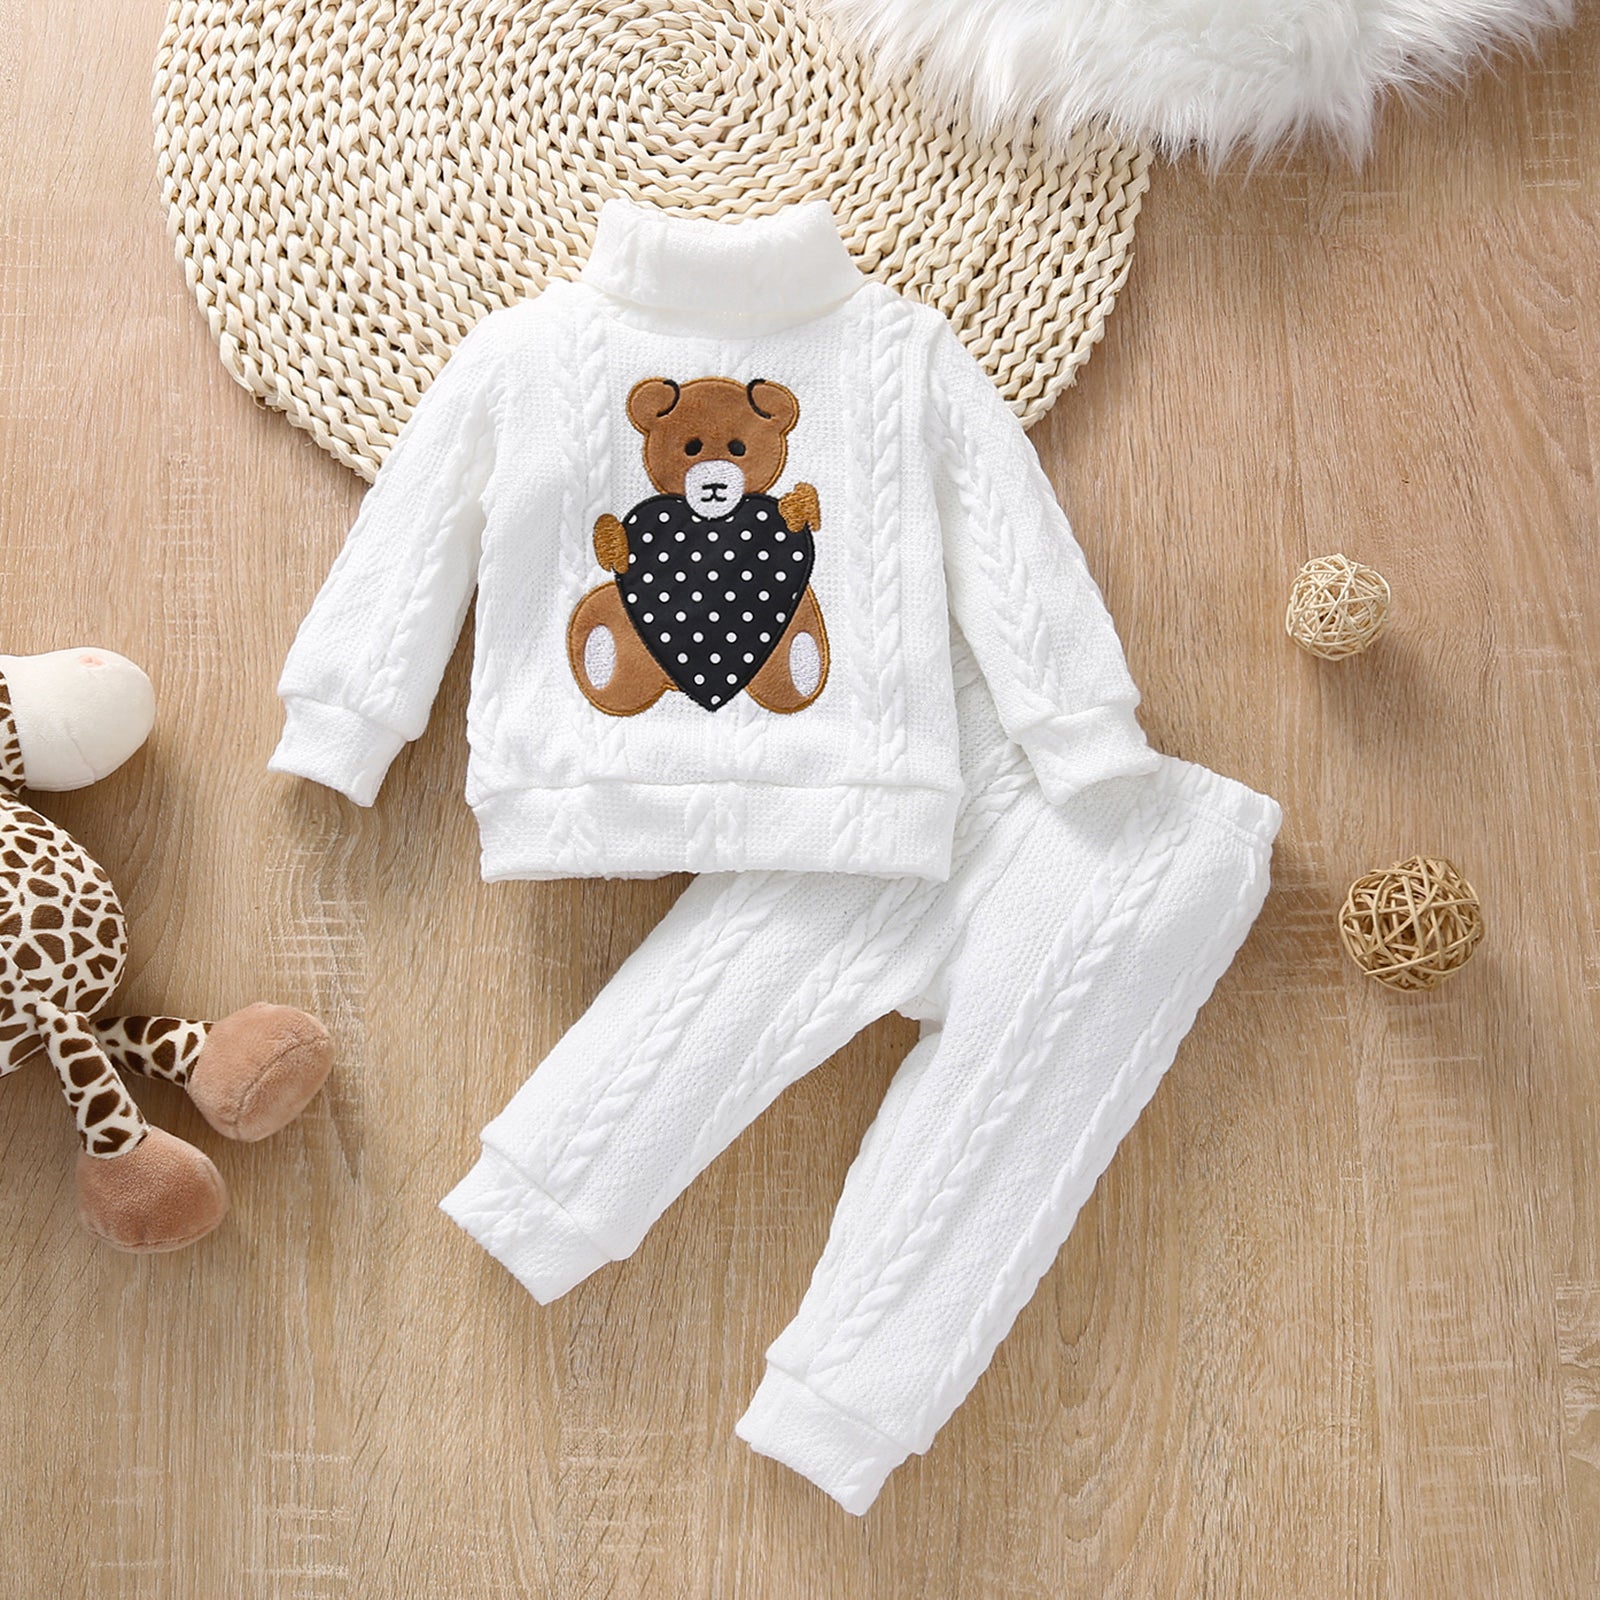 2pcs Teddy and Heart Applique Knitted Turtleneck Long-sleeve White Baby Set